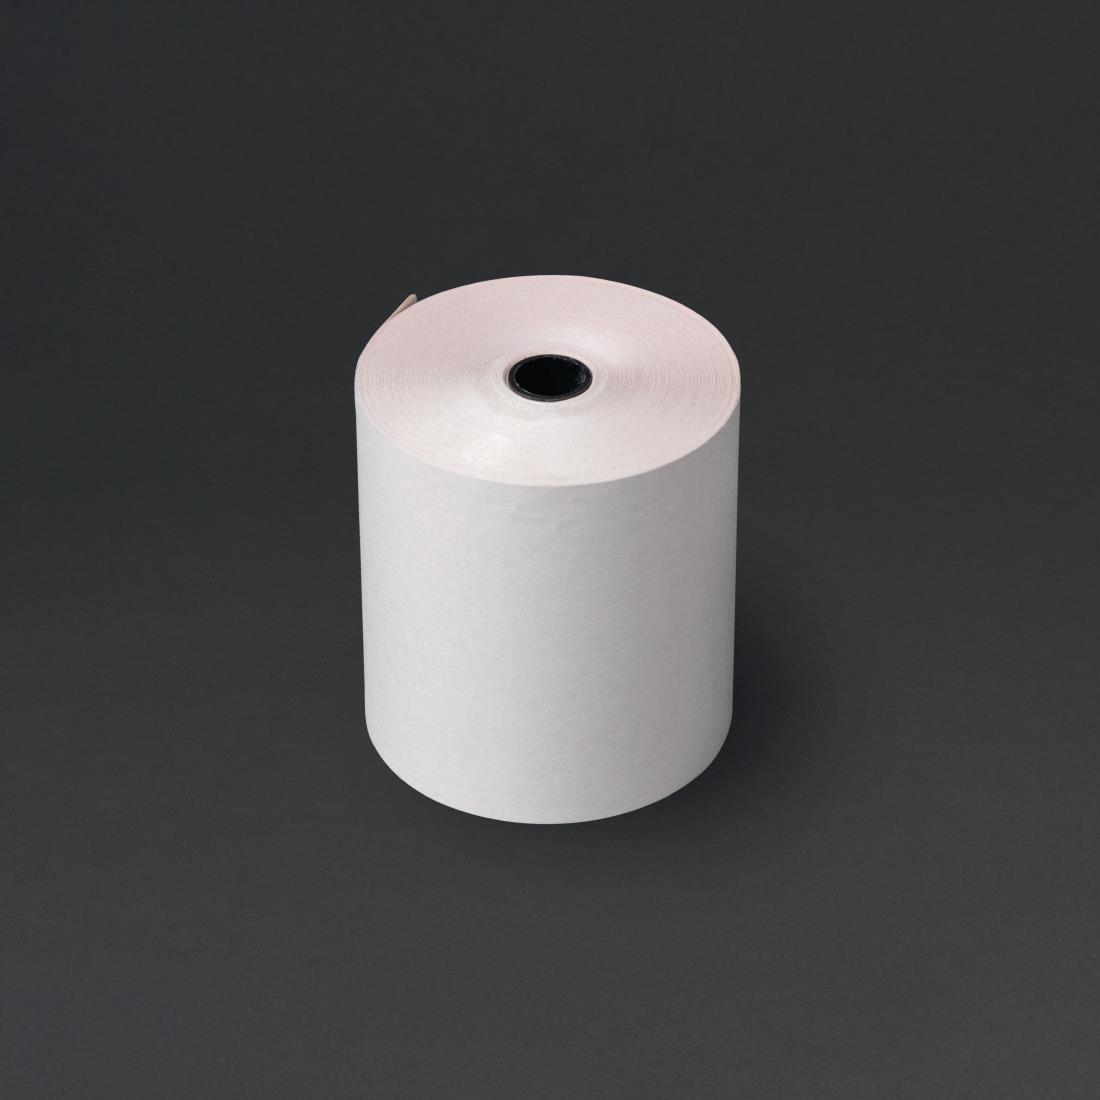 Fiesta Non-Thermal 3ply Till Roll 75 x 70mm (Pack of 20) - DK597  - 2